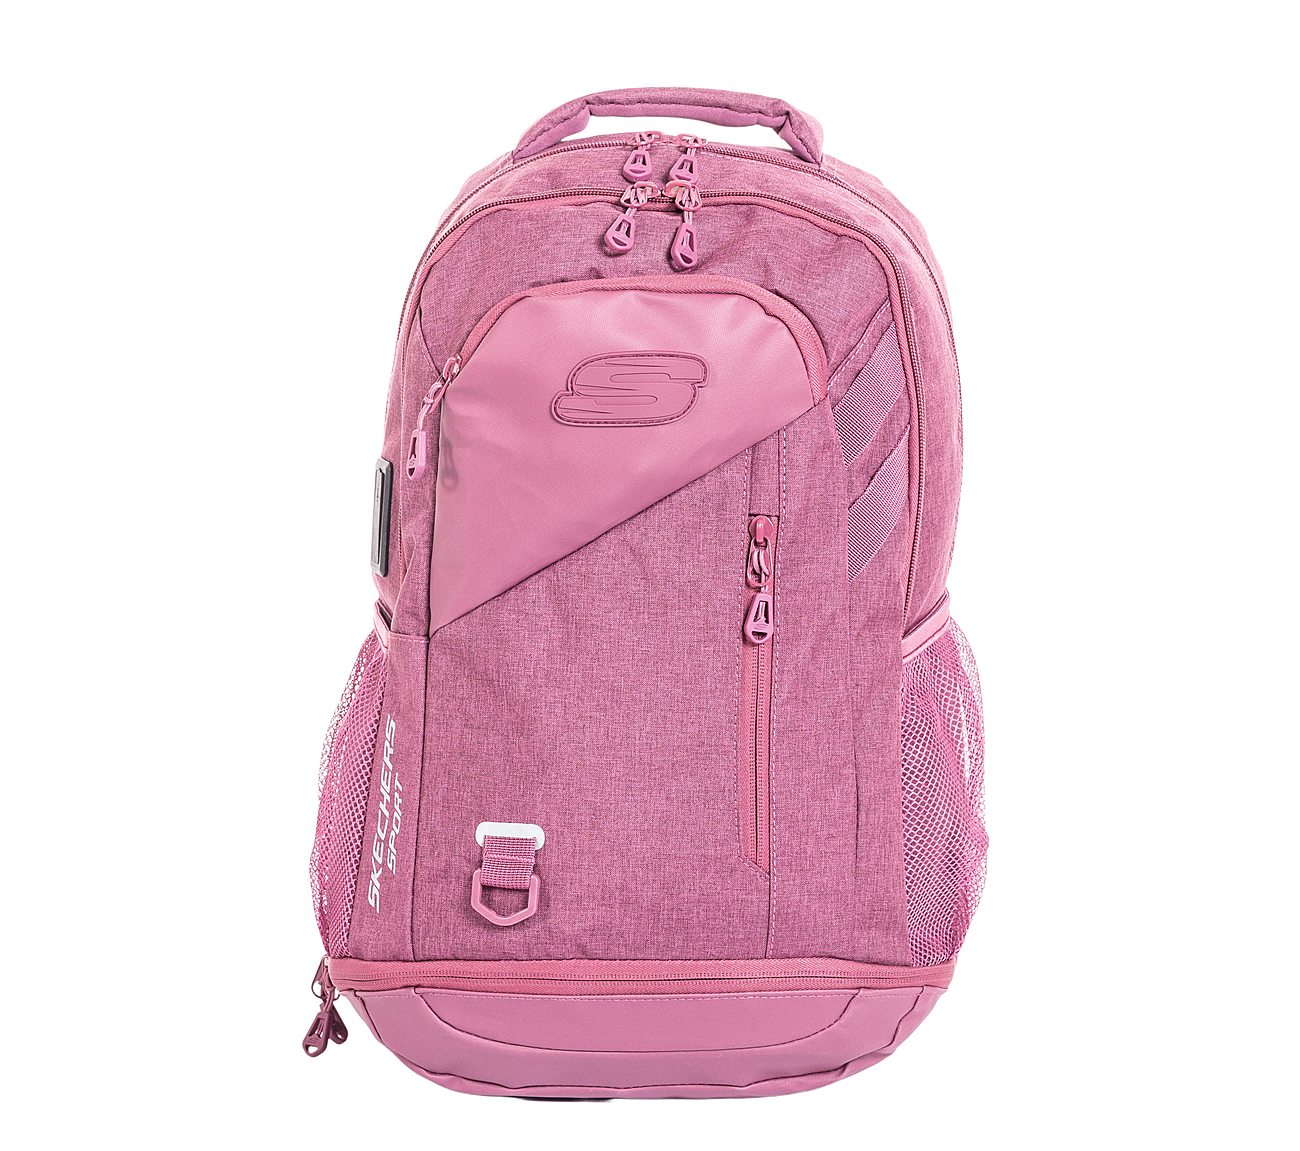 Explore Backpack Accessories Shoes